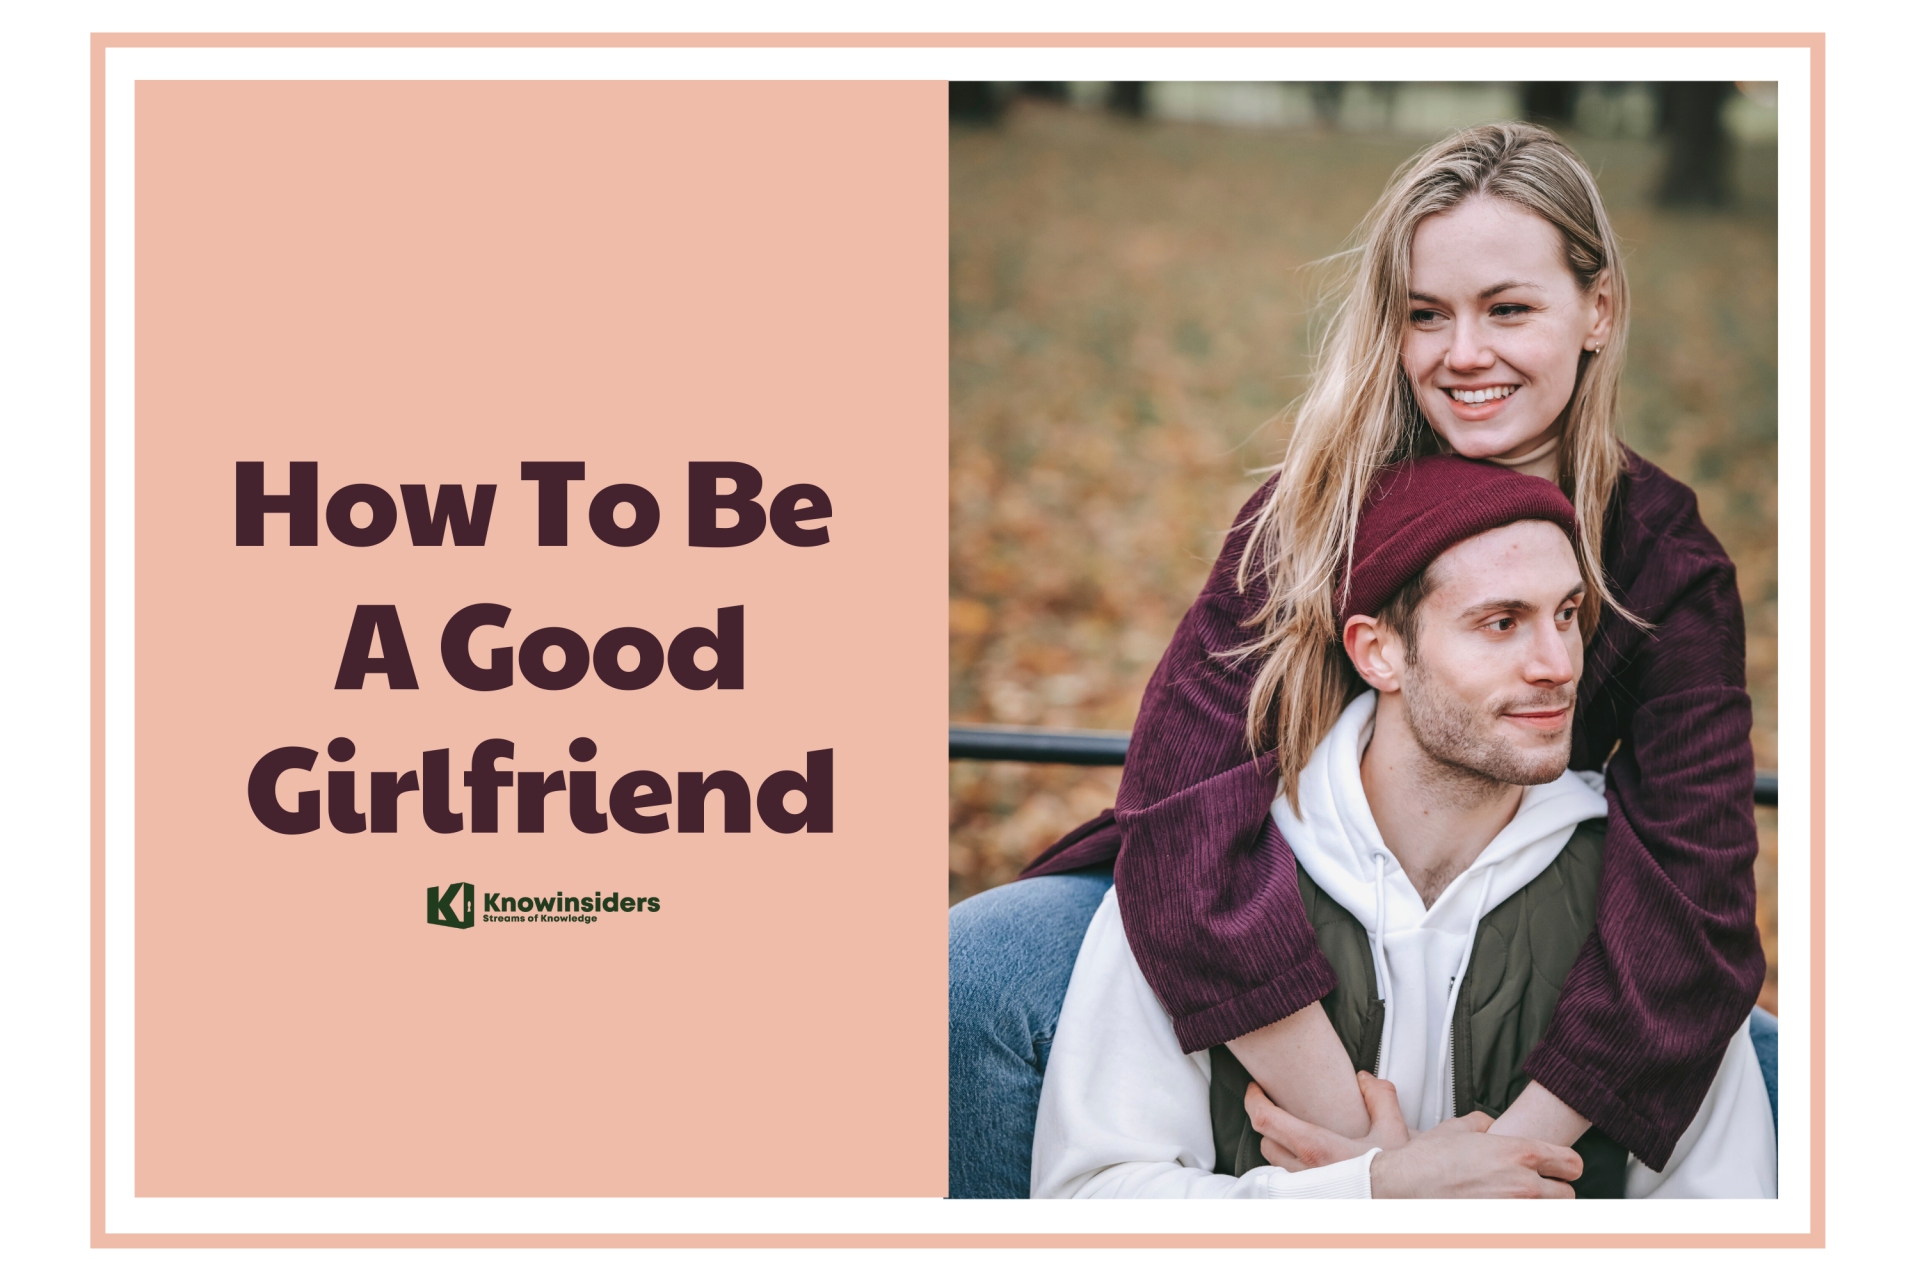 How To Be A Good Girlfriend & Mistakes to Avoid